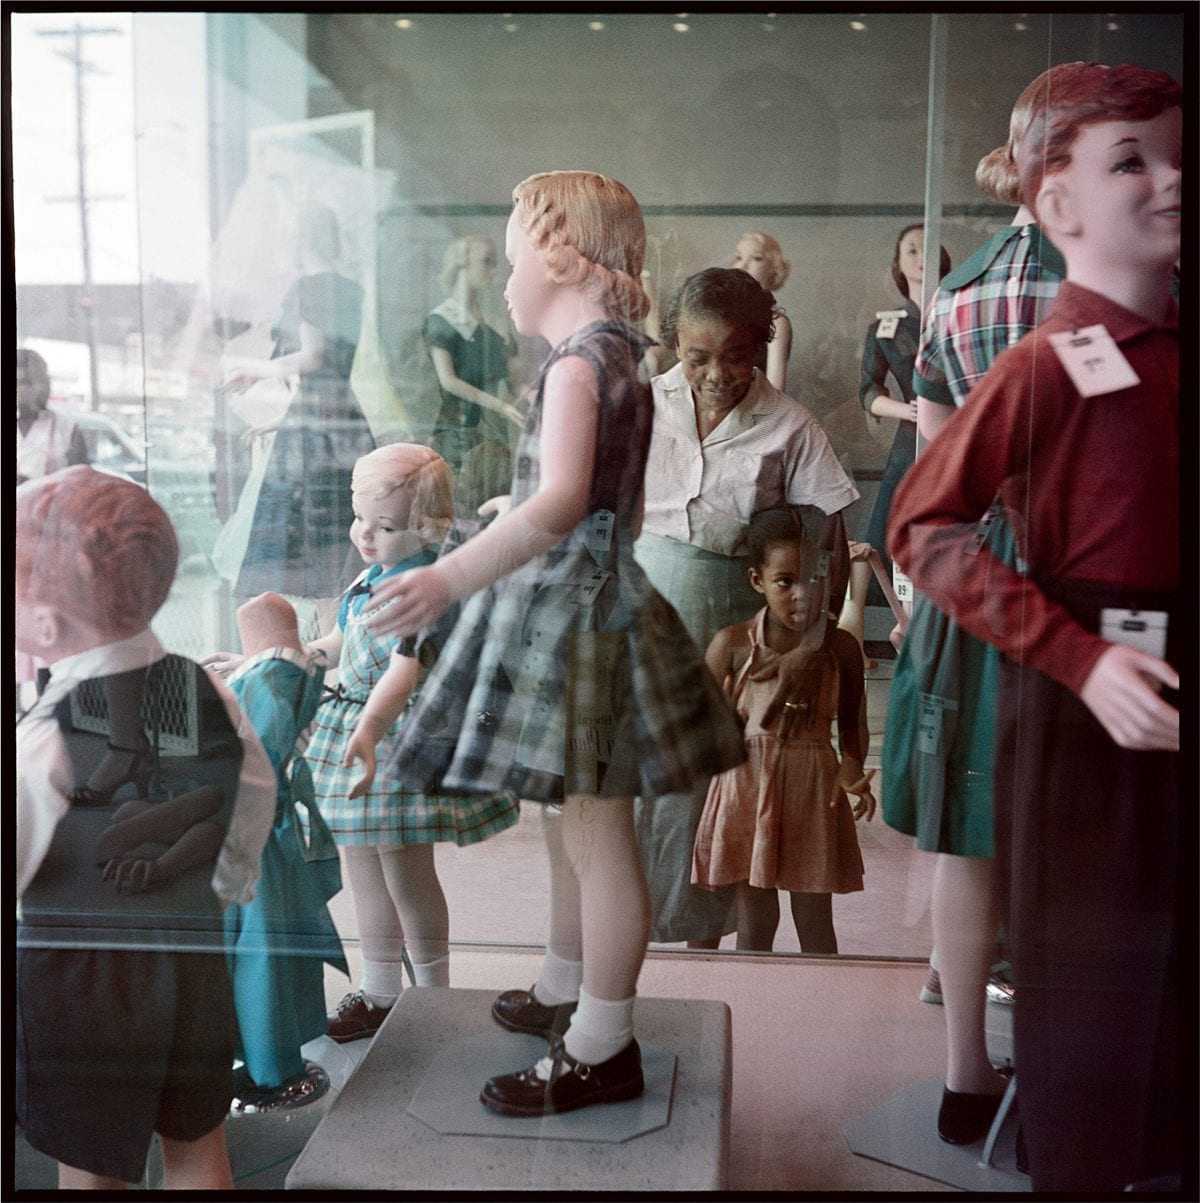 Gordon Parks (American, 1912–2006), Ondria Tanner and Her Grandmother Window-Shopping, Mobile, Alabama, 1956, courtesy of and copyright The Gordon Parks Foundation.